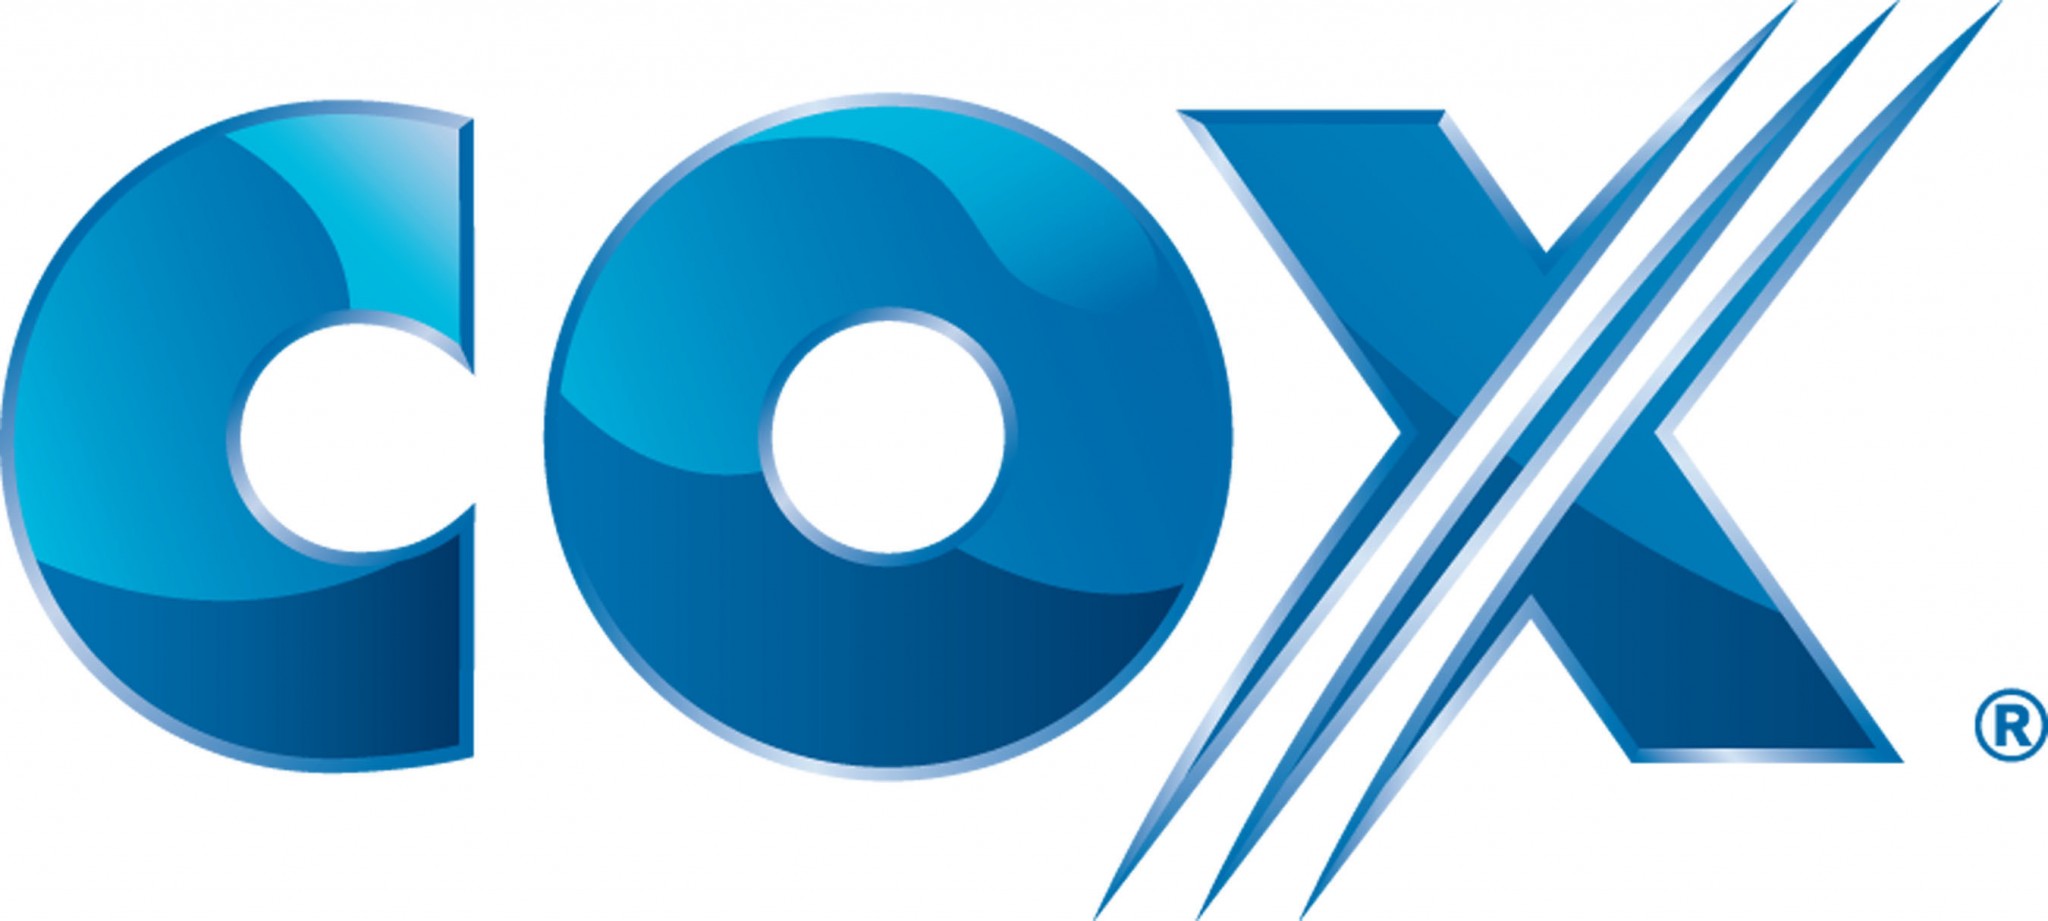 Cox Told to Clarify its ‘Powered by Fiber’ Claim to Tout Internet Service